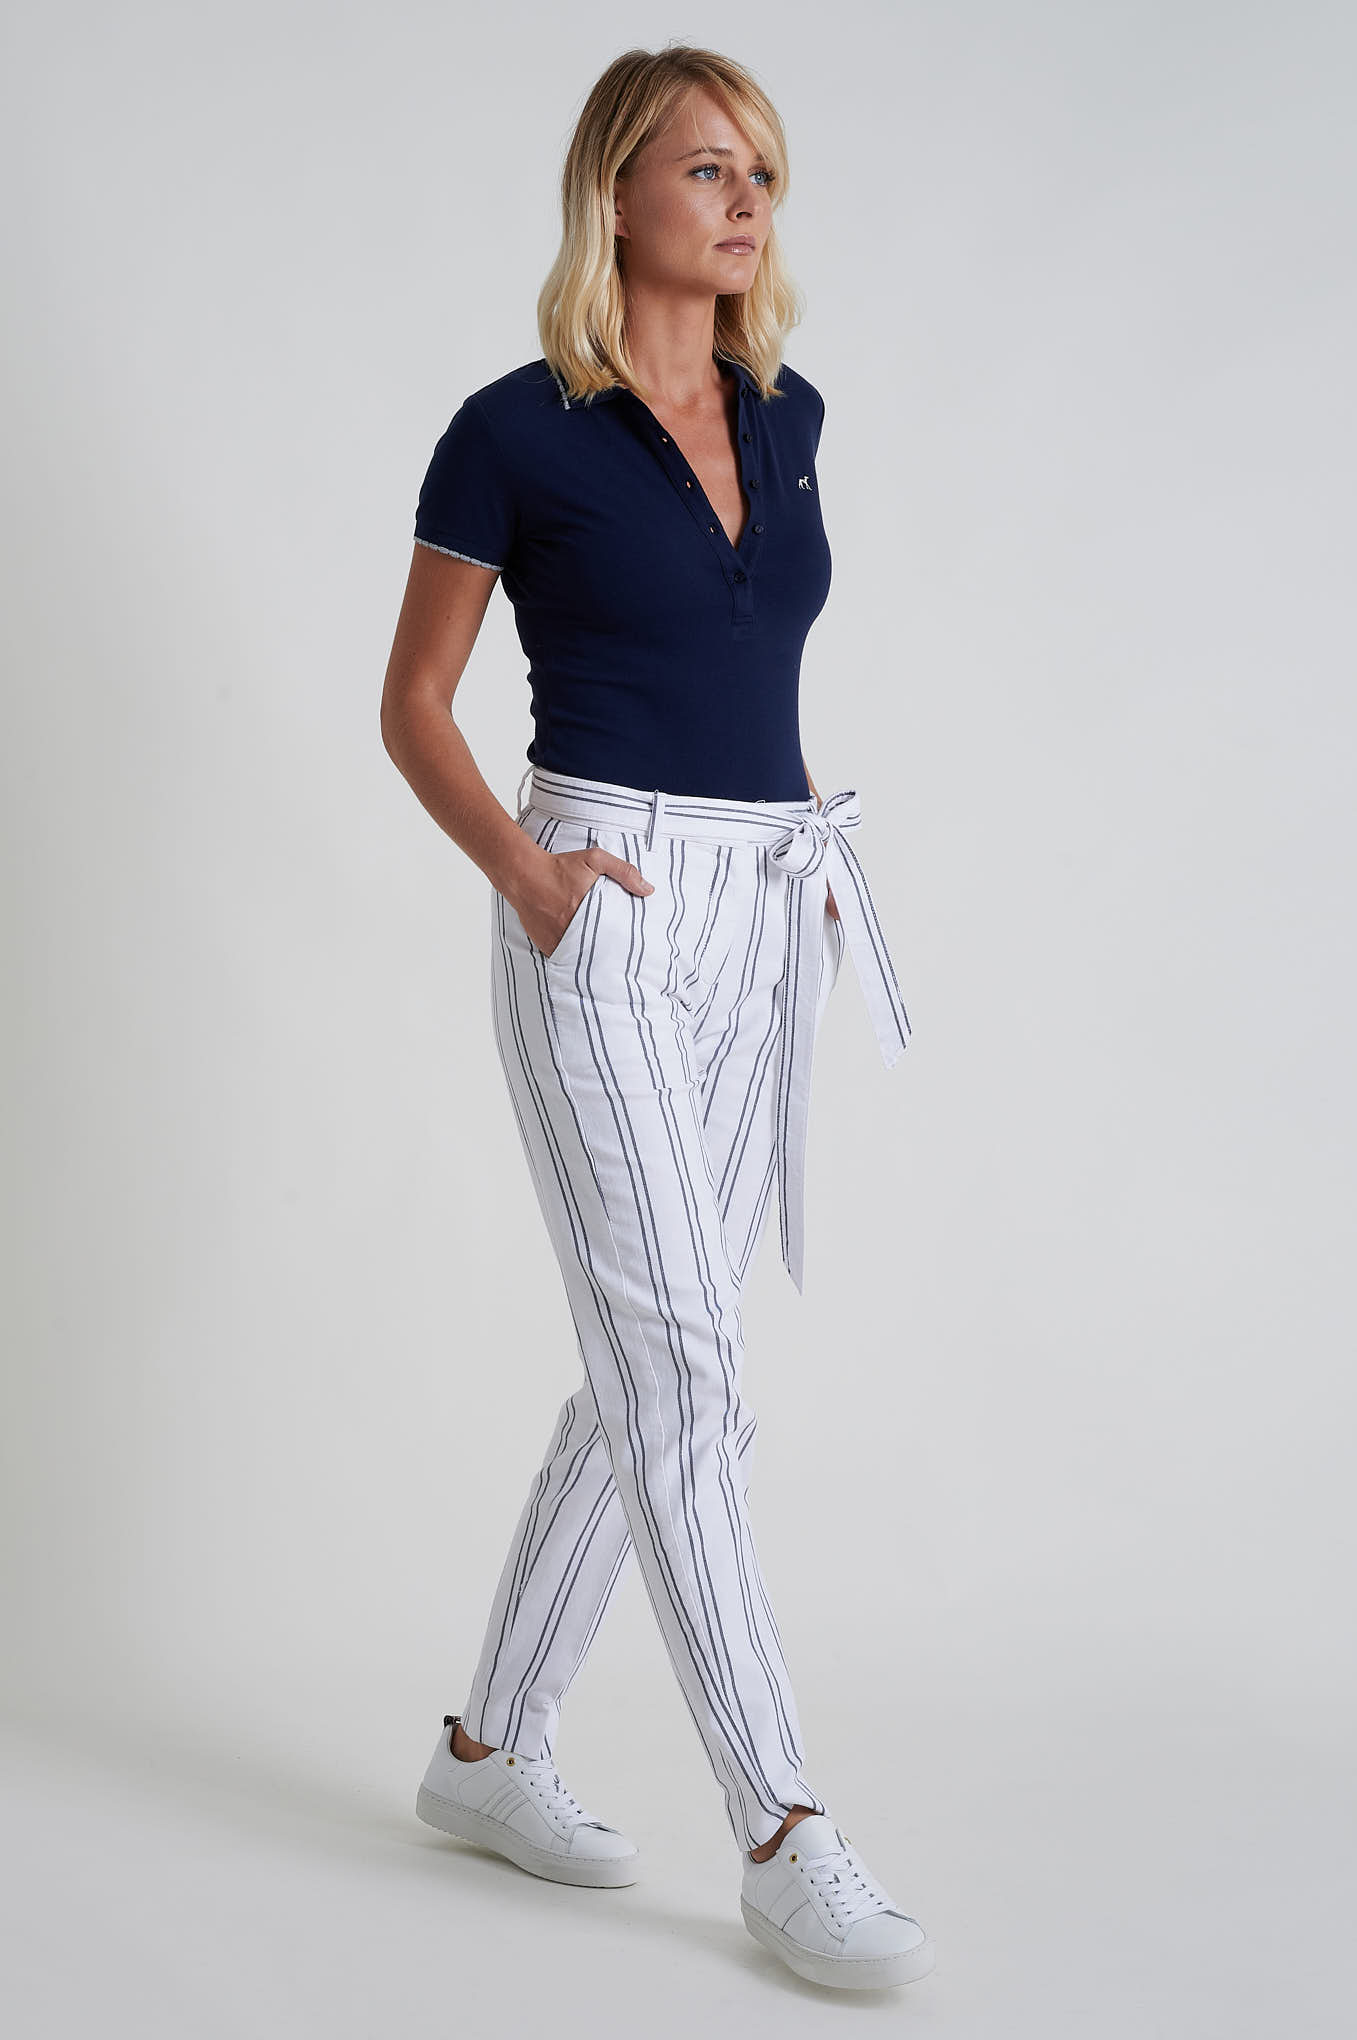 Chino Trousers White Casual Woman